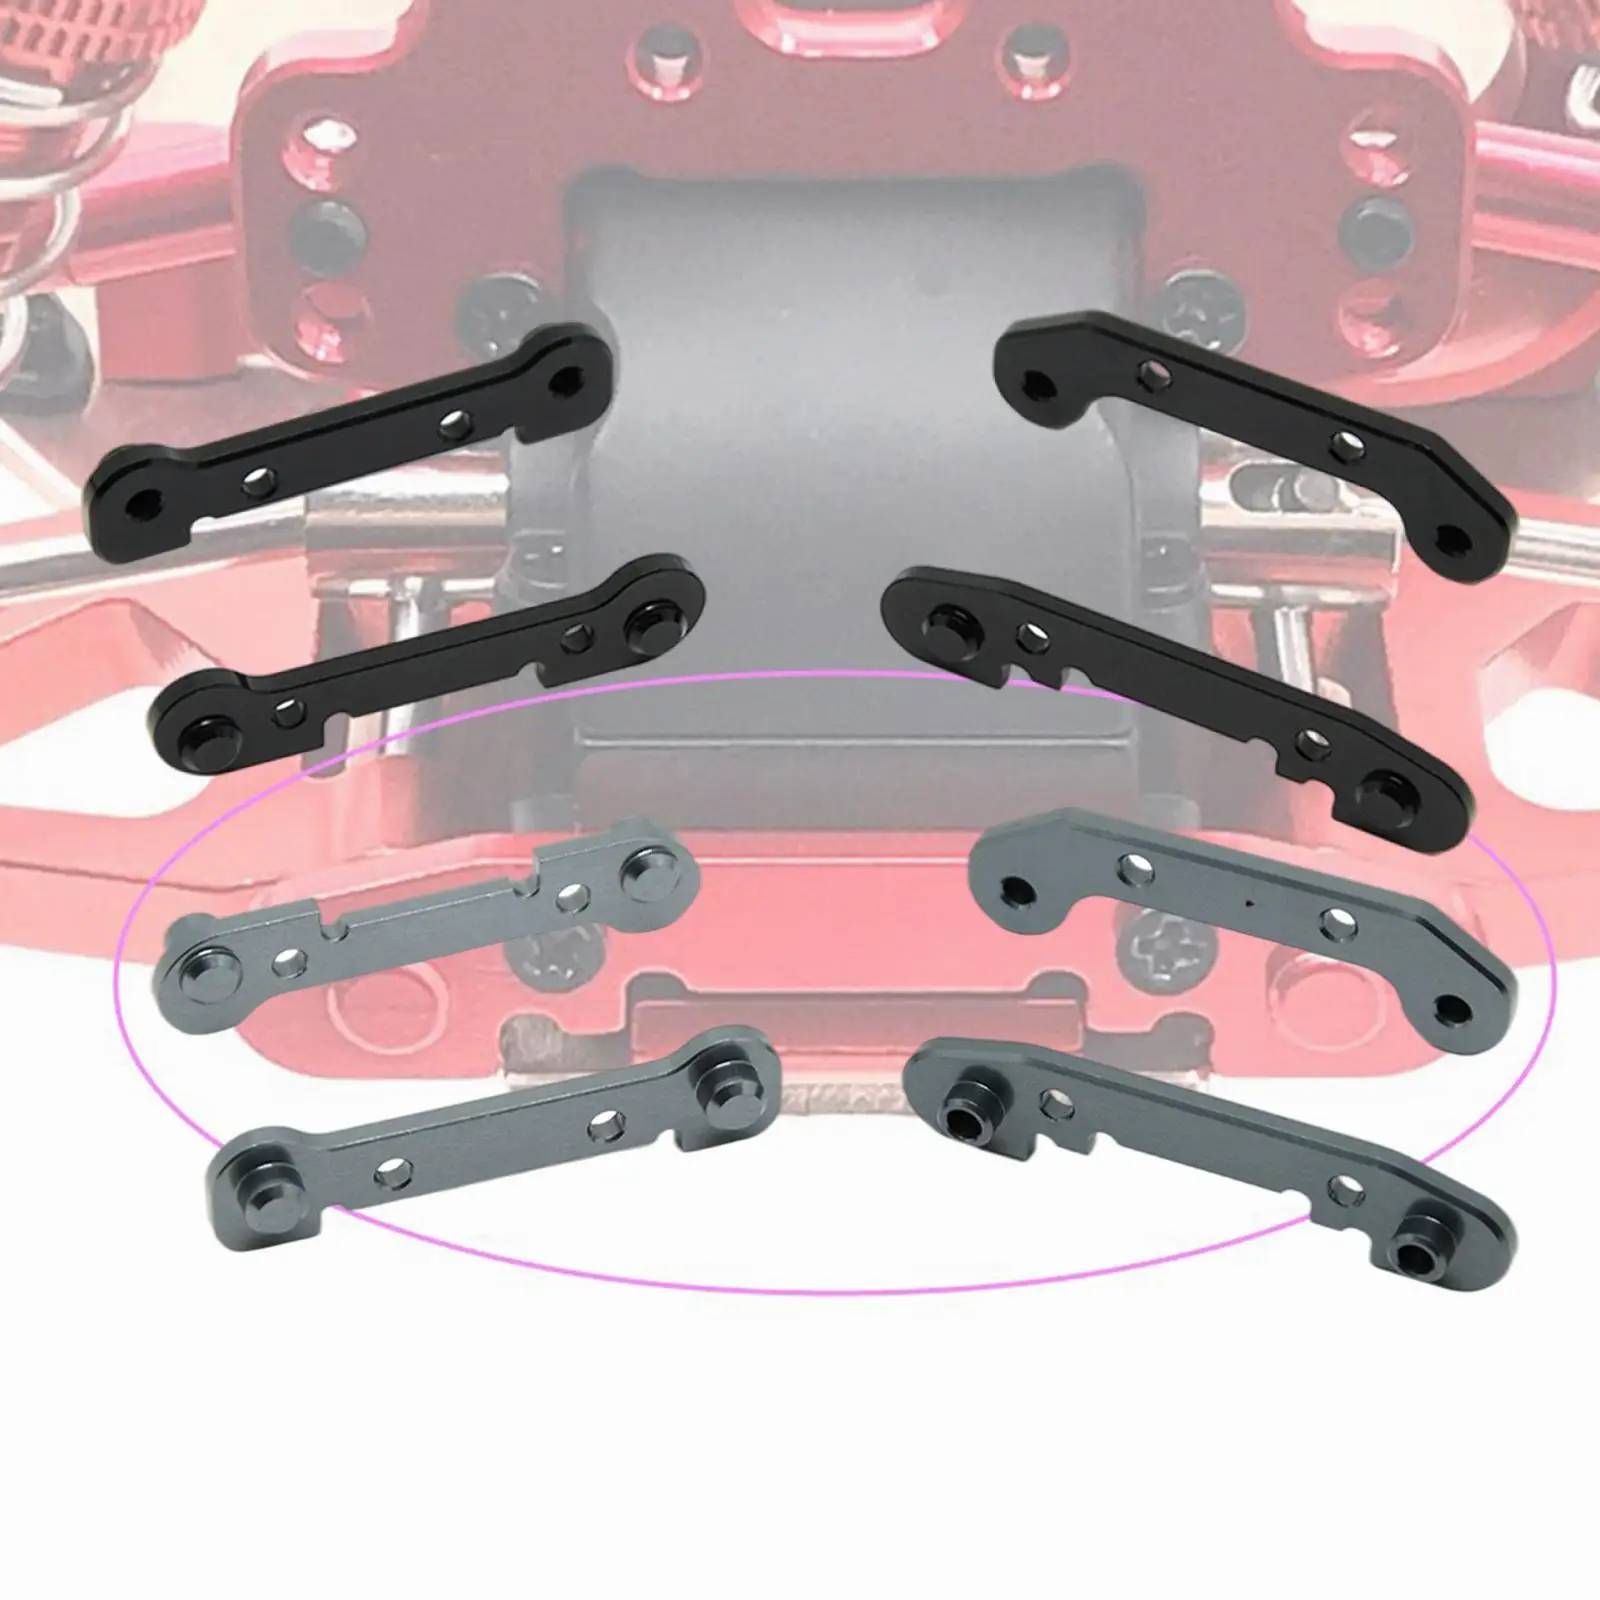 4 Pieces 37mm Reinforced Swing Arm Spare Parts Reinforcement Kit for Wltoys 124016 124017 124018 124019 1:12 RC Car Replacement